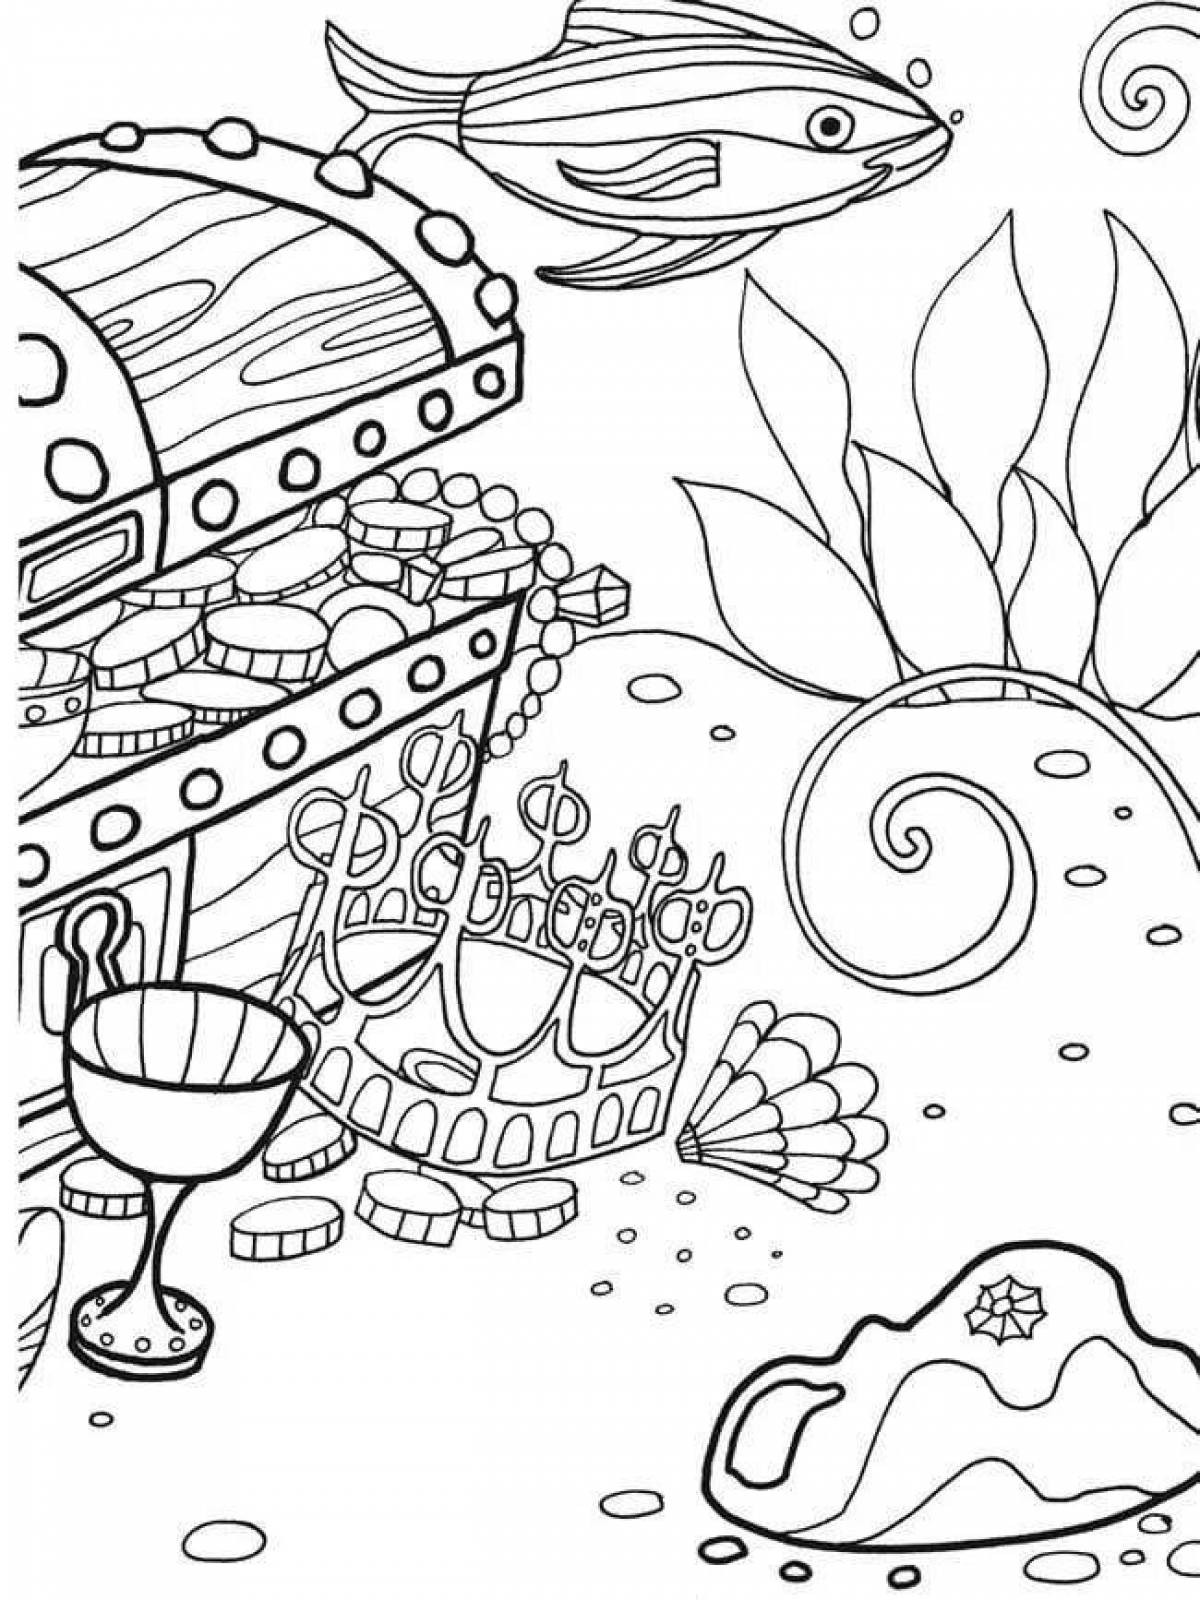 Adorable underwater world coloring book for kids